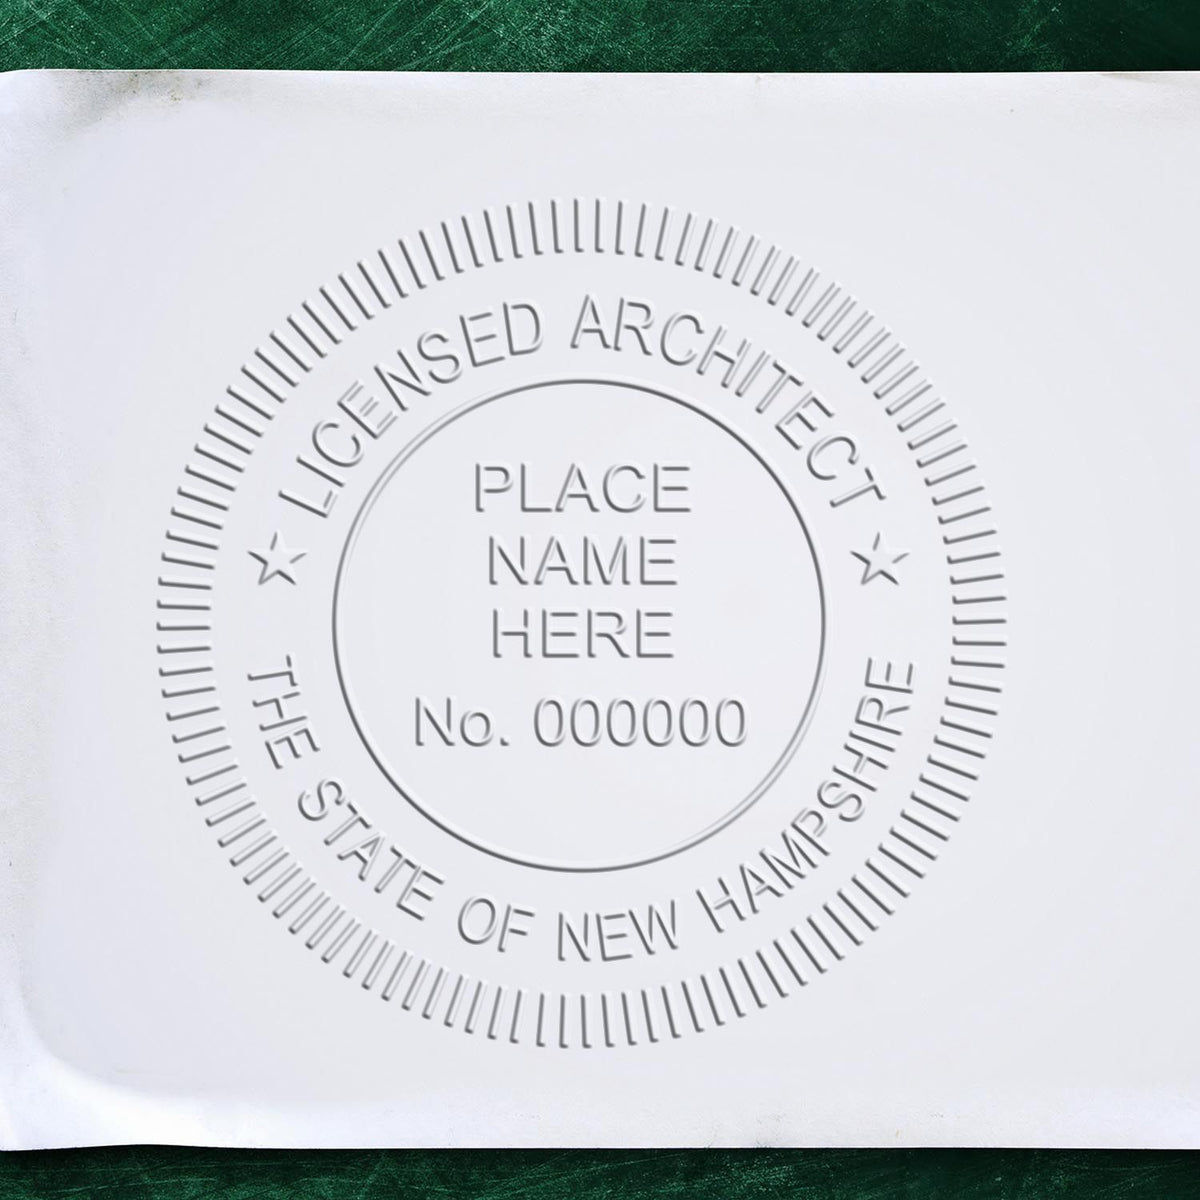 A stamped imprint of the Gift New Hampshire Architect Seal in this stylish lifestyle photo, setting the tone for a unique and personalized product.